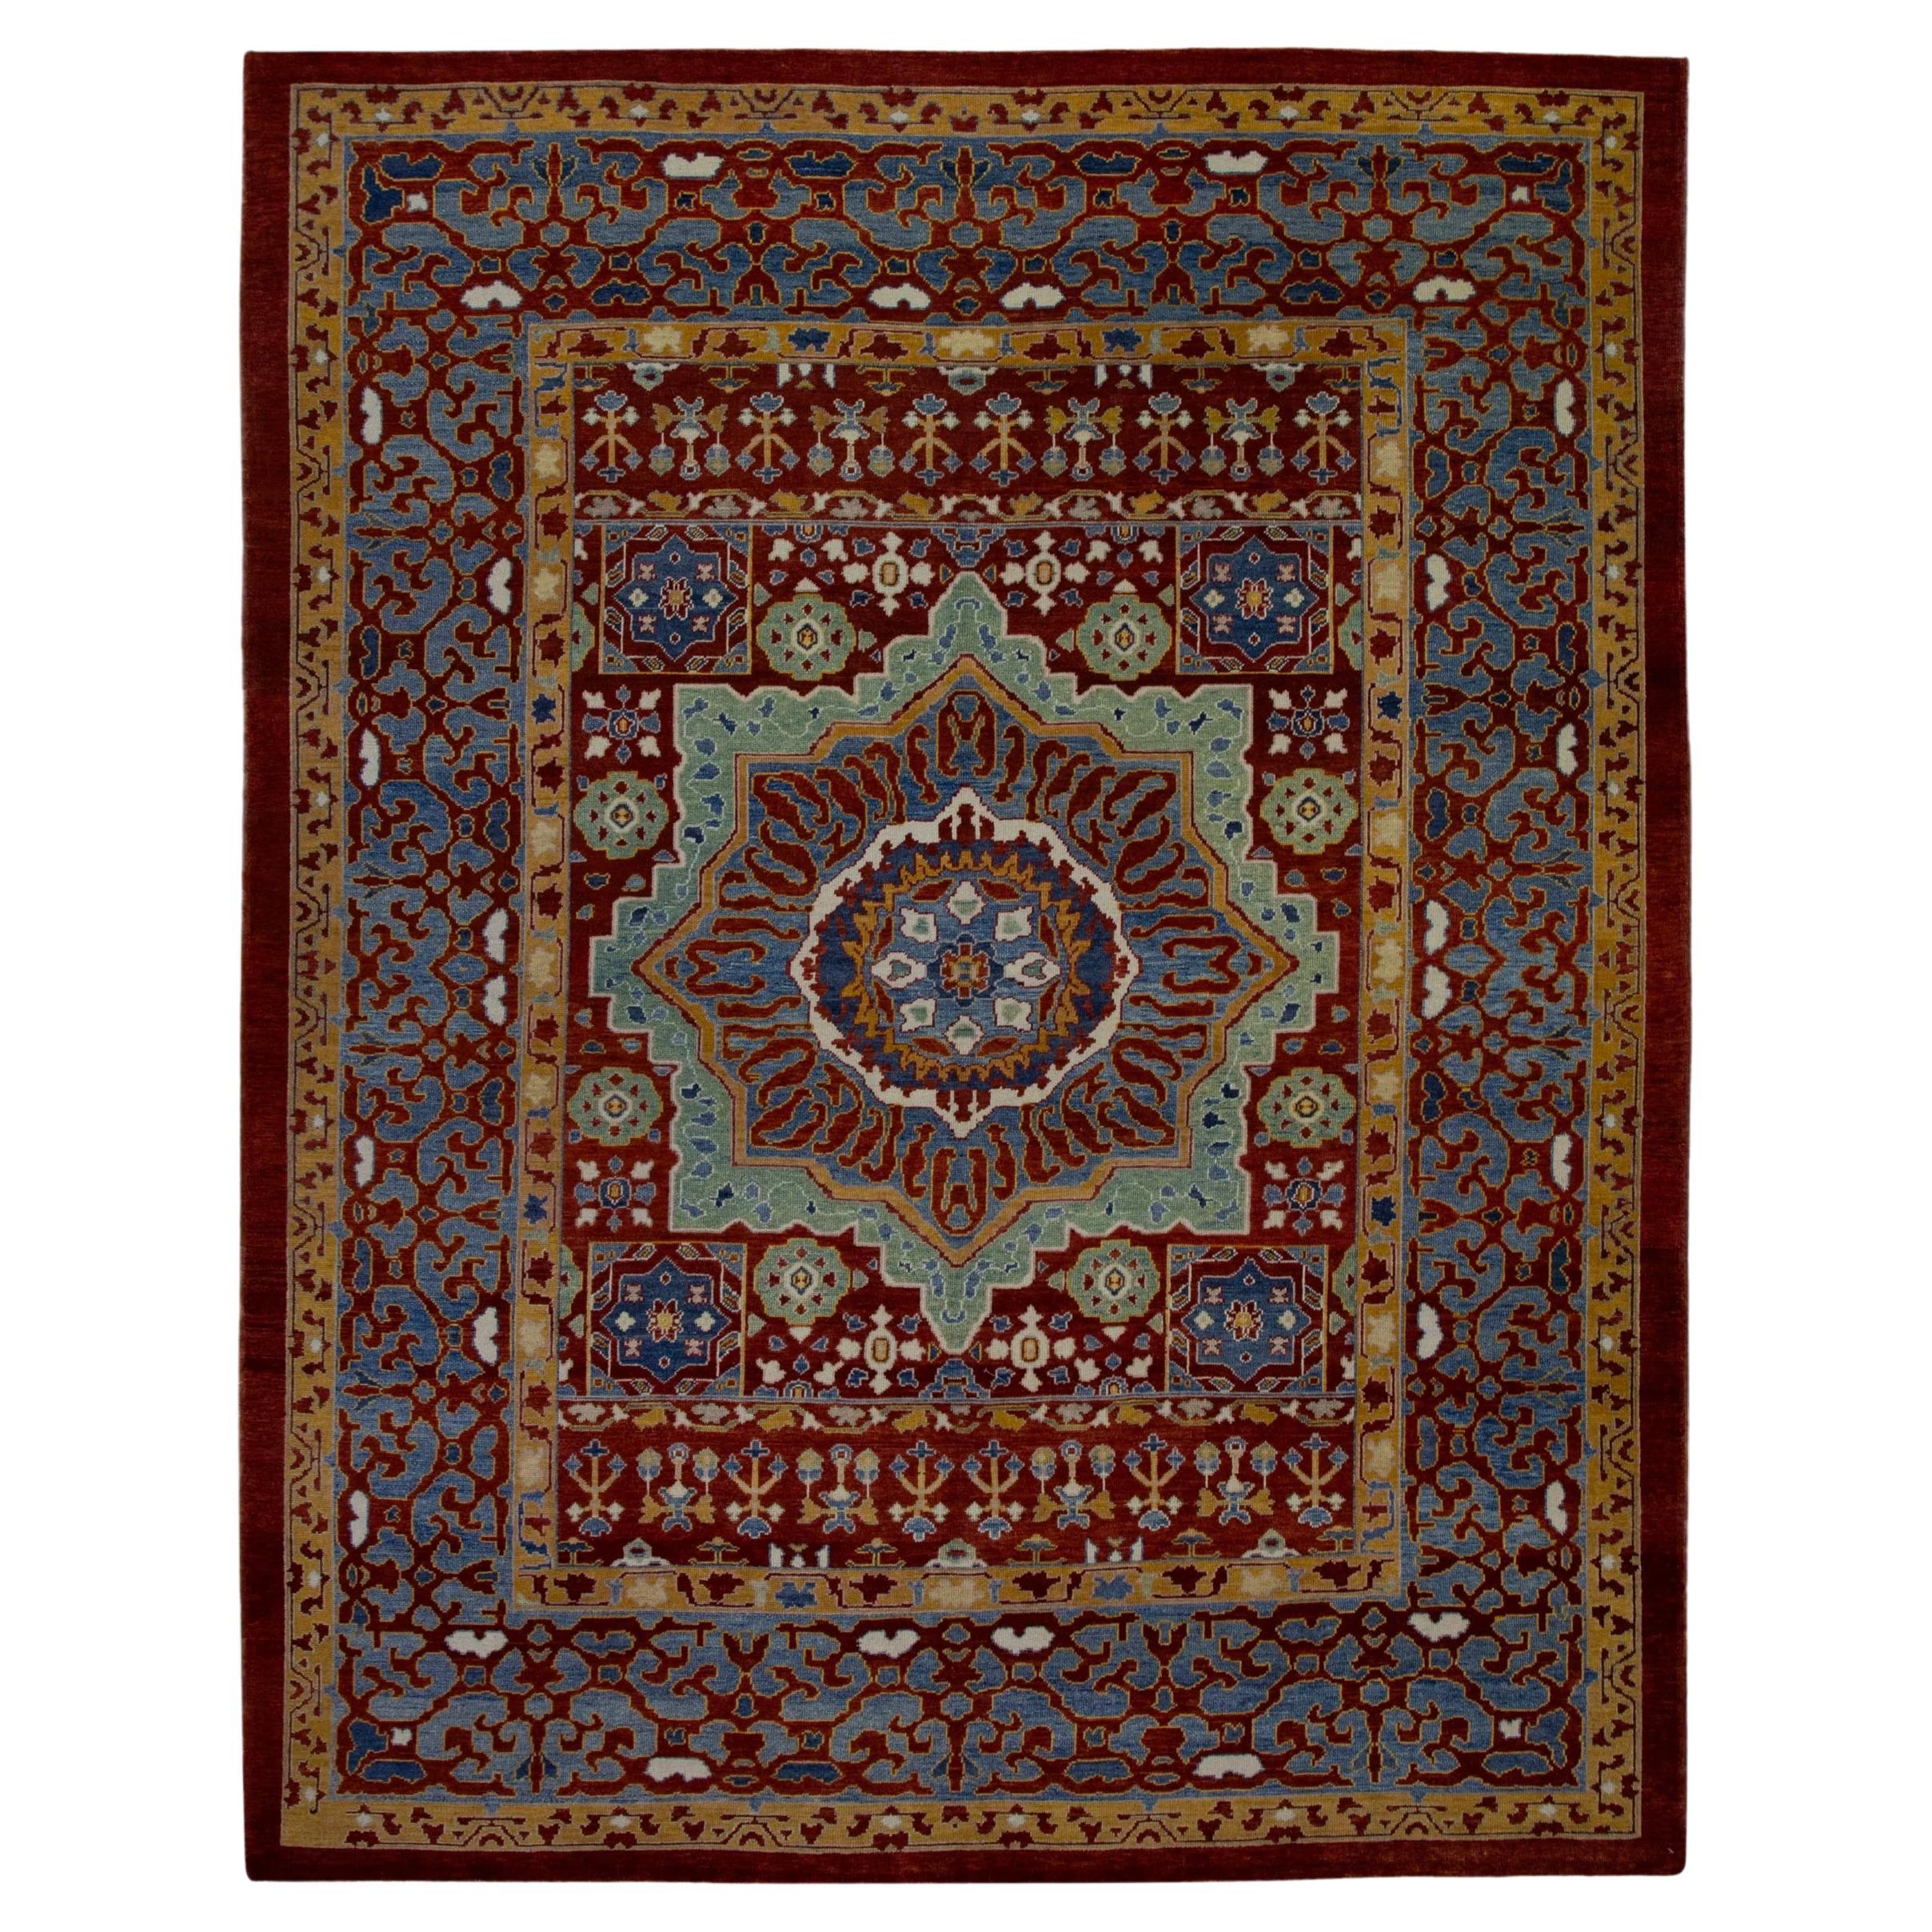 Red and Blue Floral Pattern Turkish Finewoven Wool Oushak Rug 8'2" x 10' 